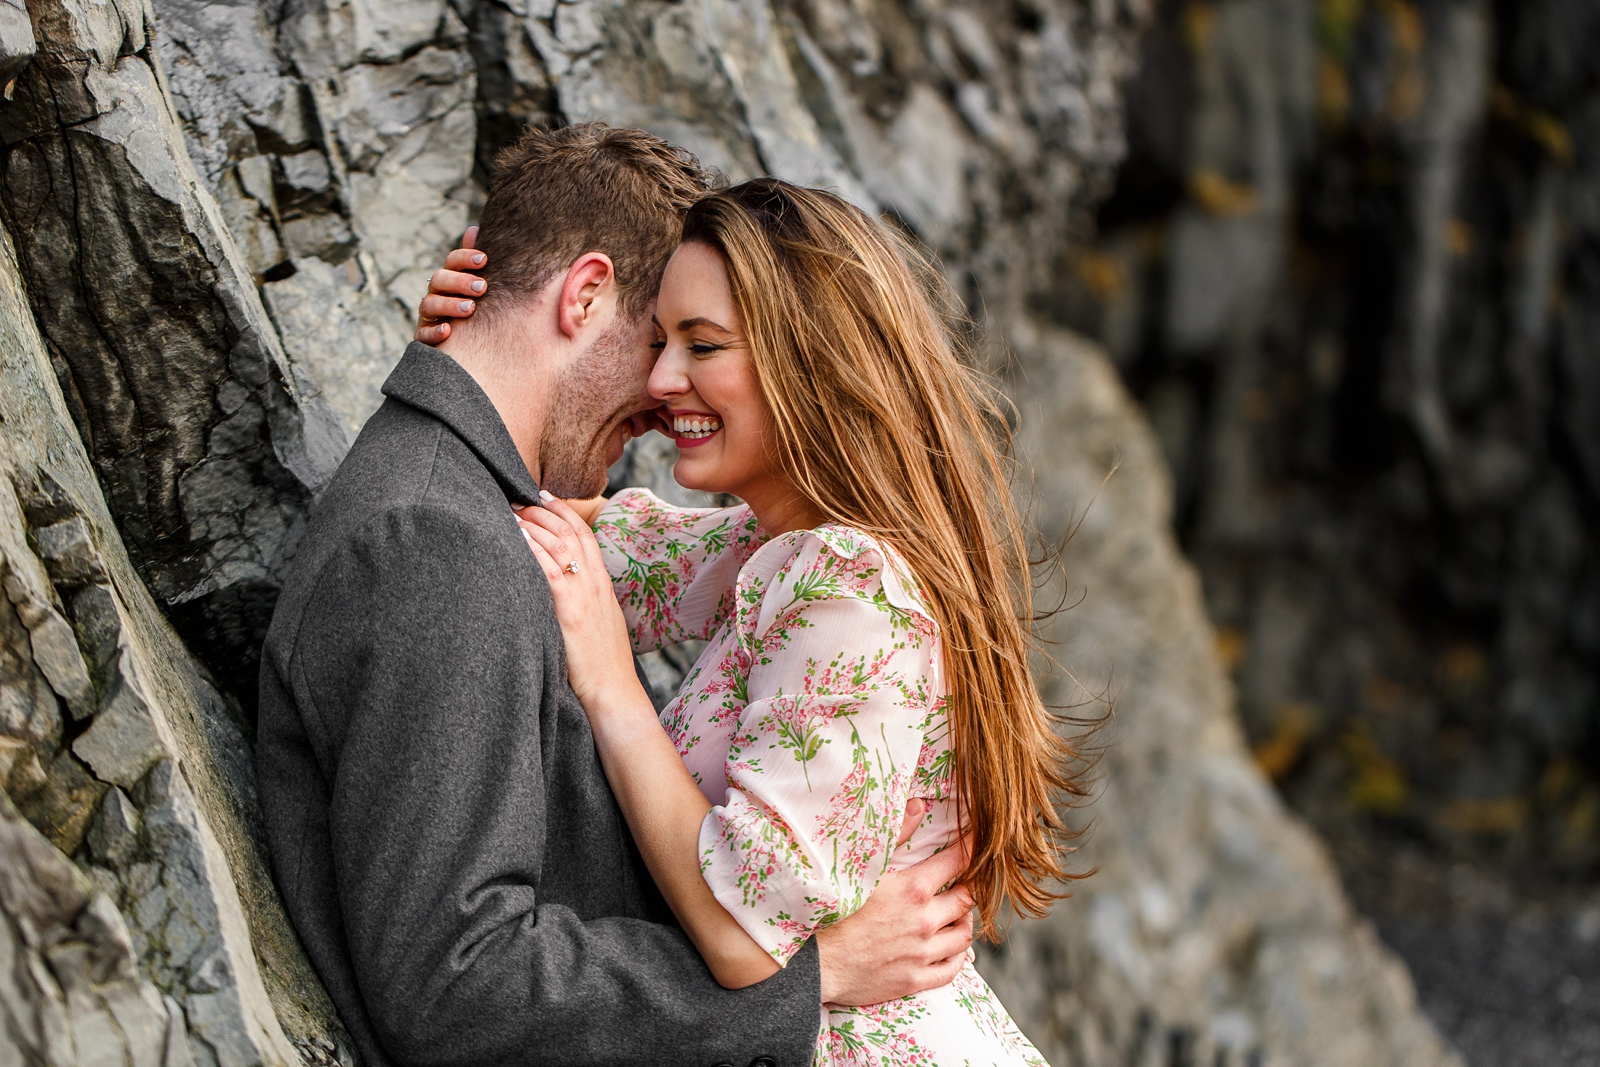 Cuddling smiling couple by basalt columns at their destination Iceland engagement session near Vik, Iceland